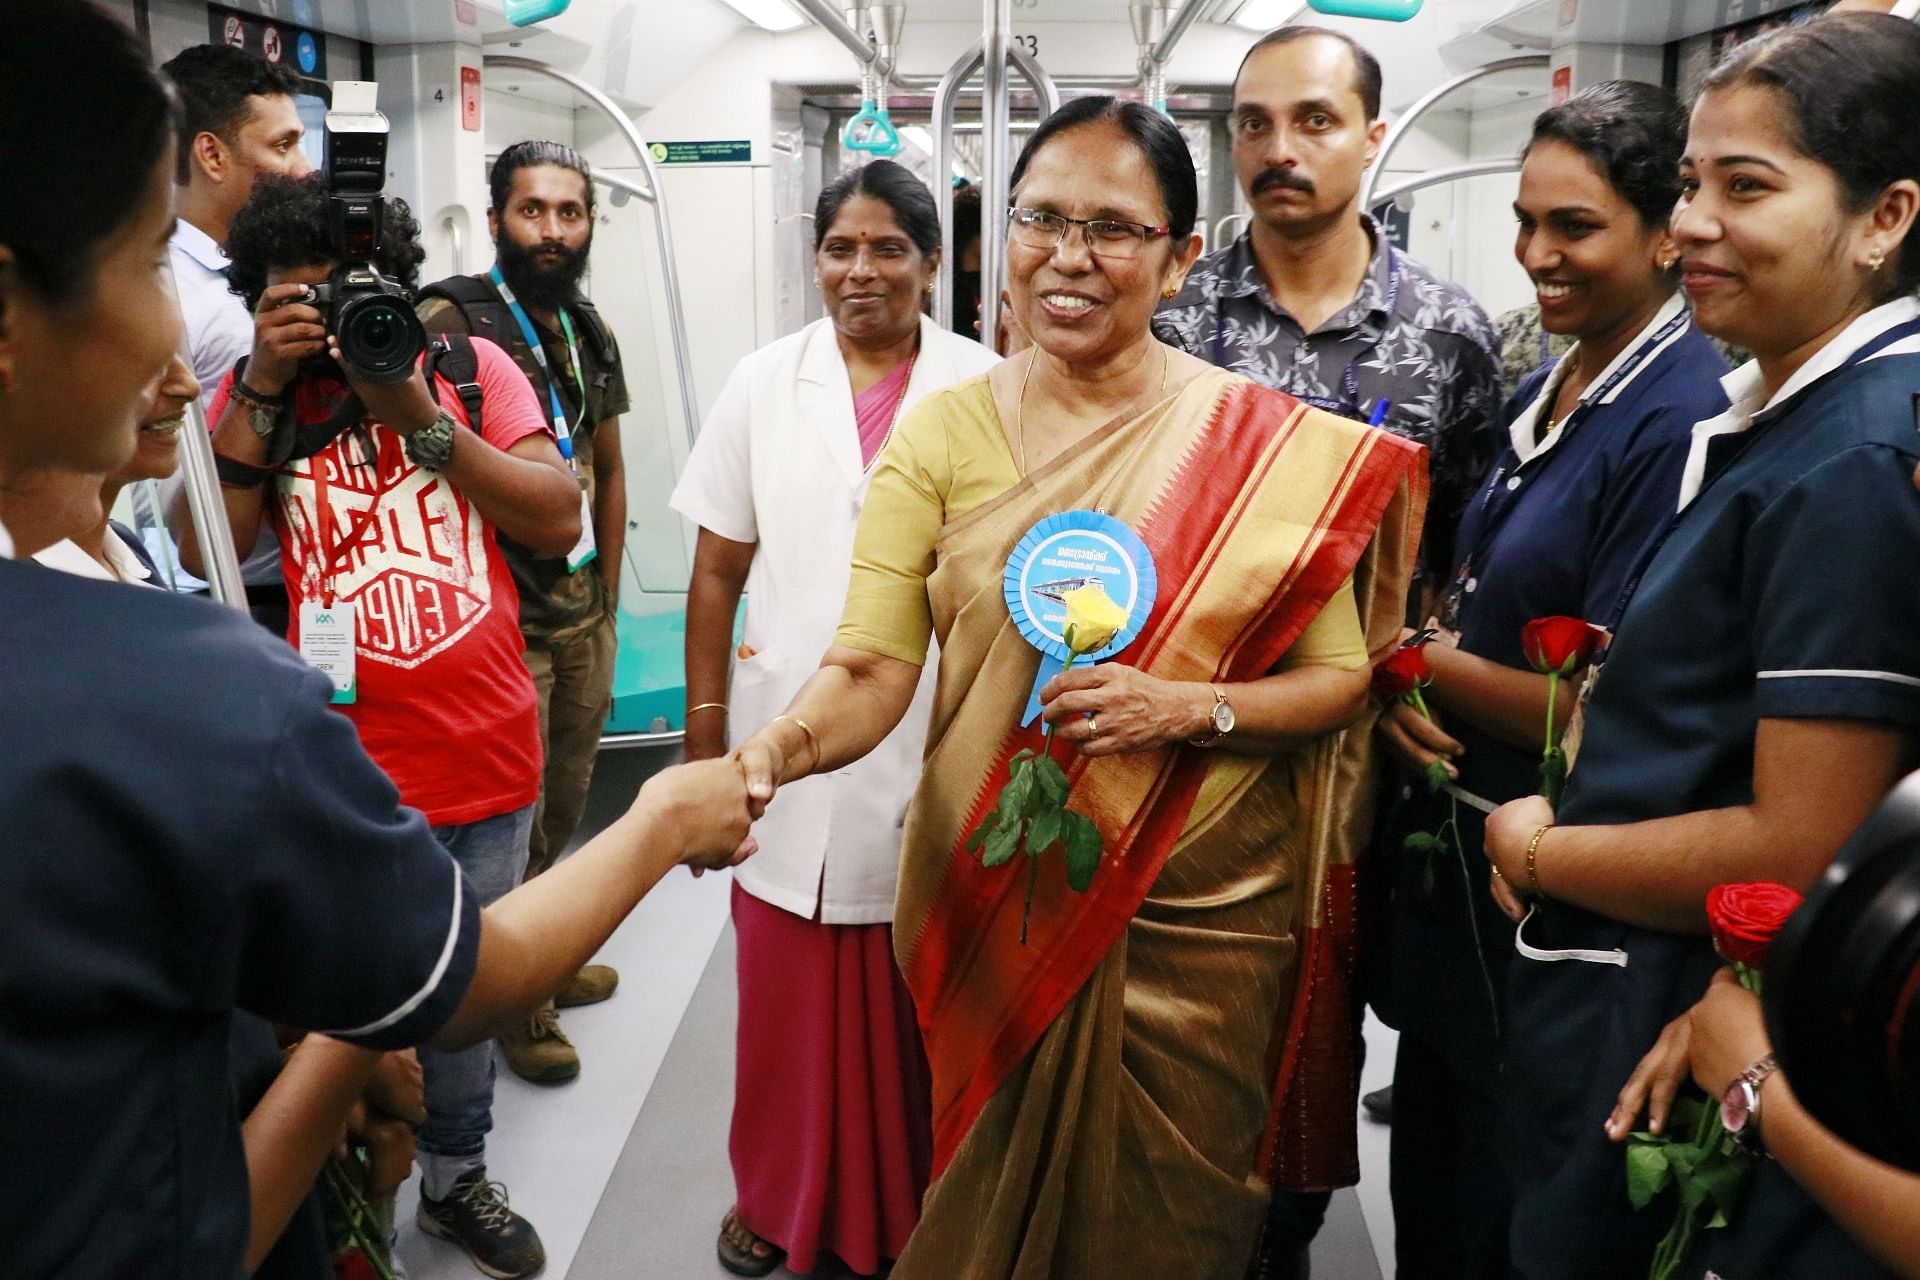 "It is significant that the Gender Park has unveiled iWTC project at a time when more and more women are foraying into entrepreneurship and exploring other self-employment options in Kerala," said Minister for Health and Social Justice K K Shailaja. (Credit: Facebook)